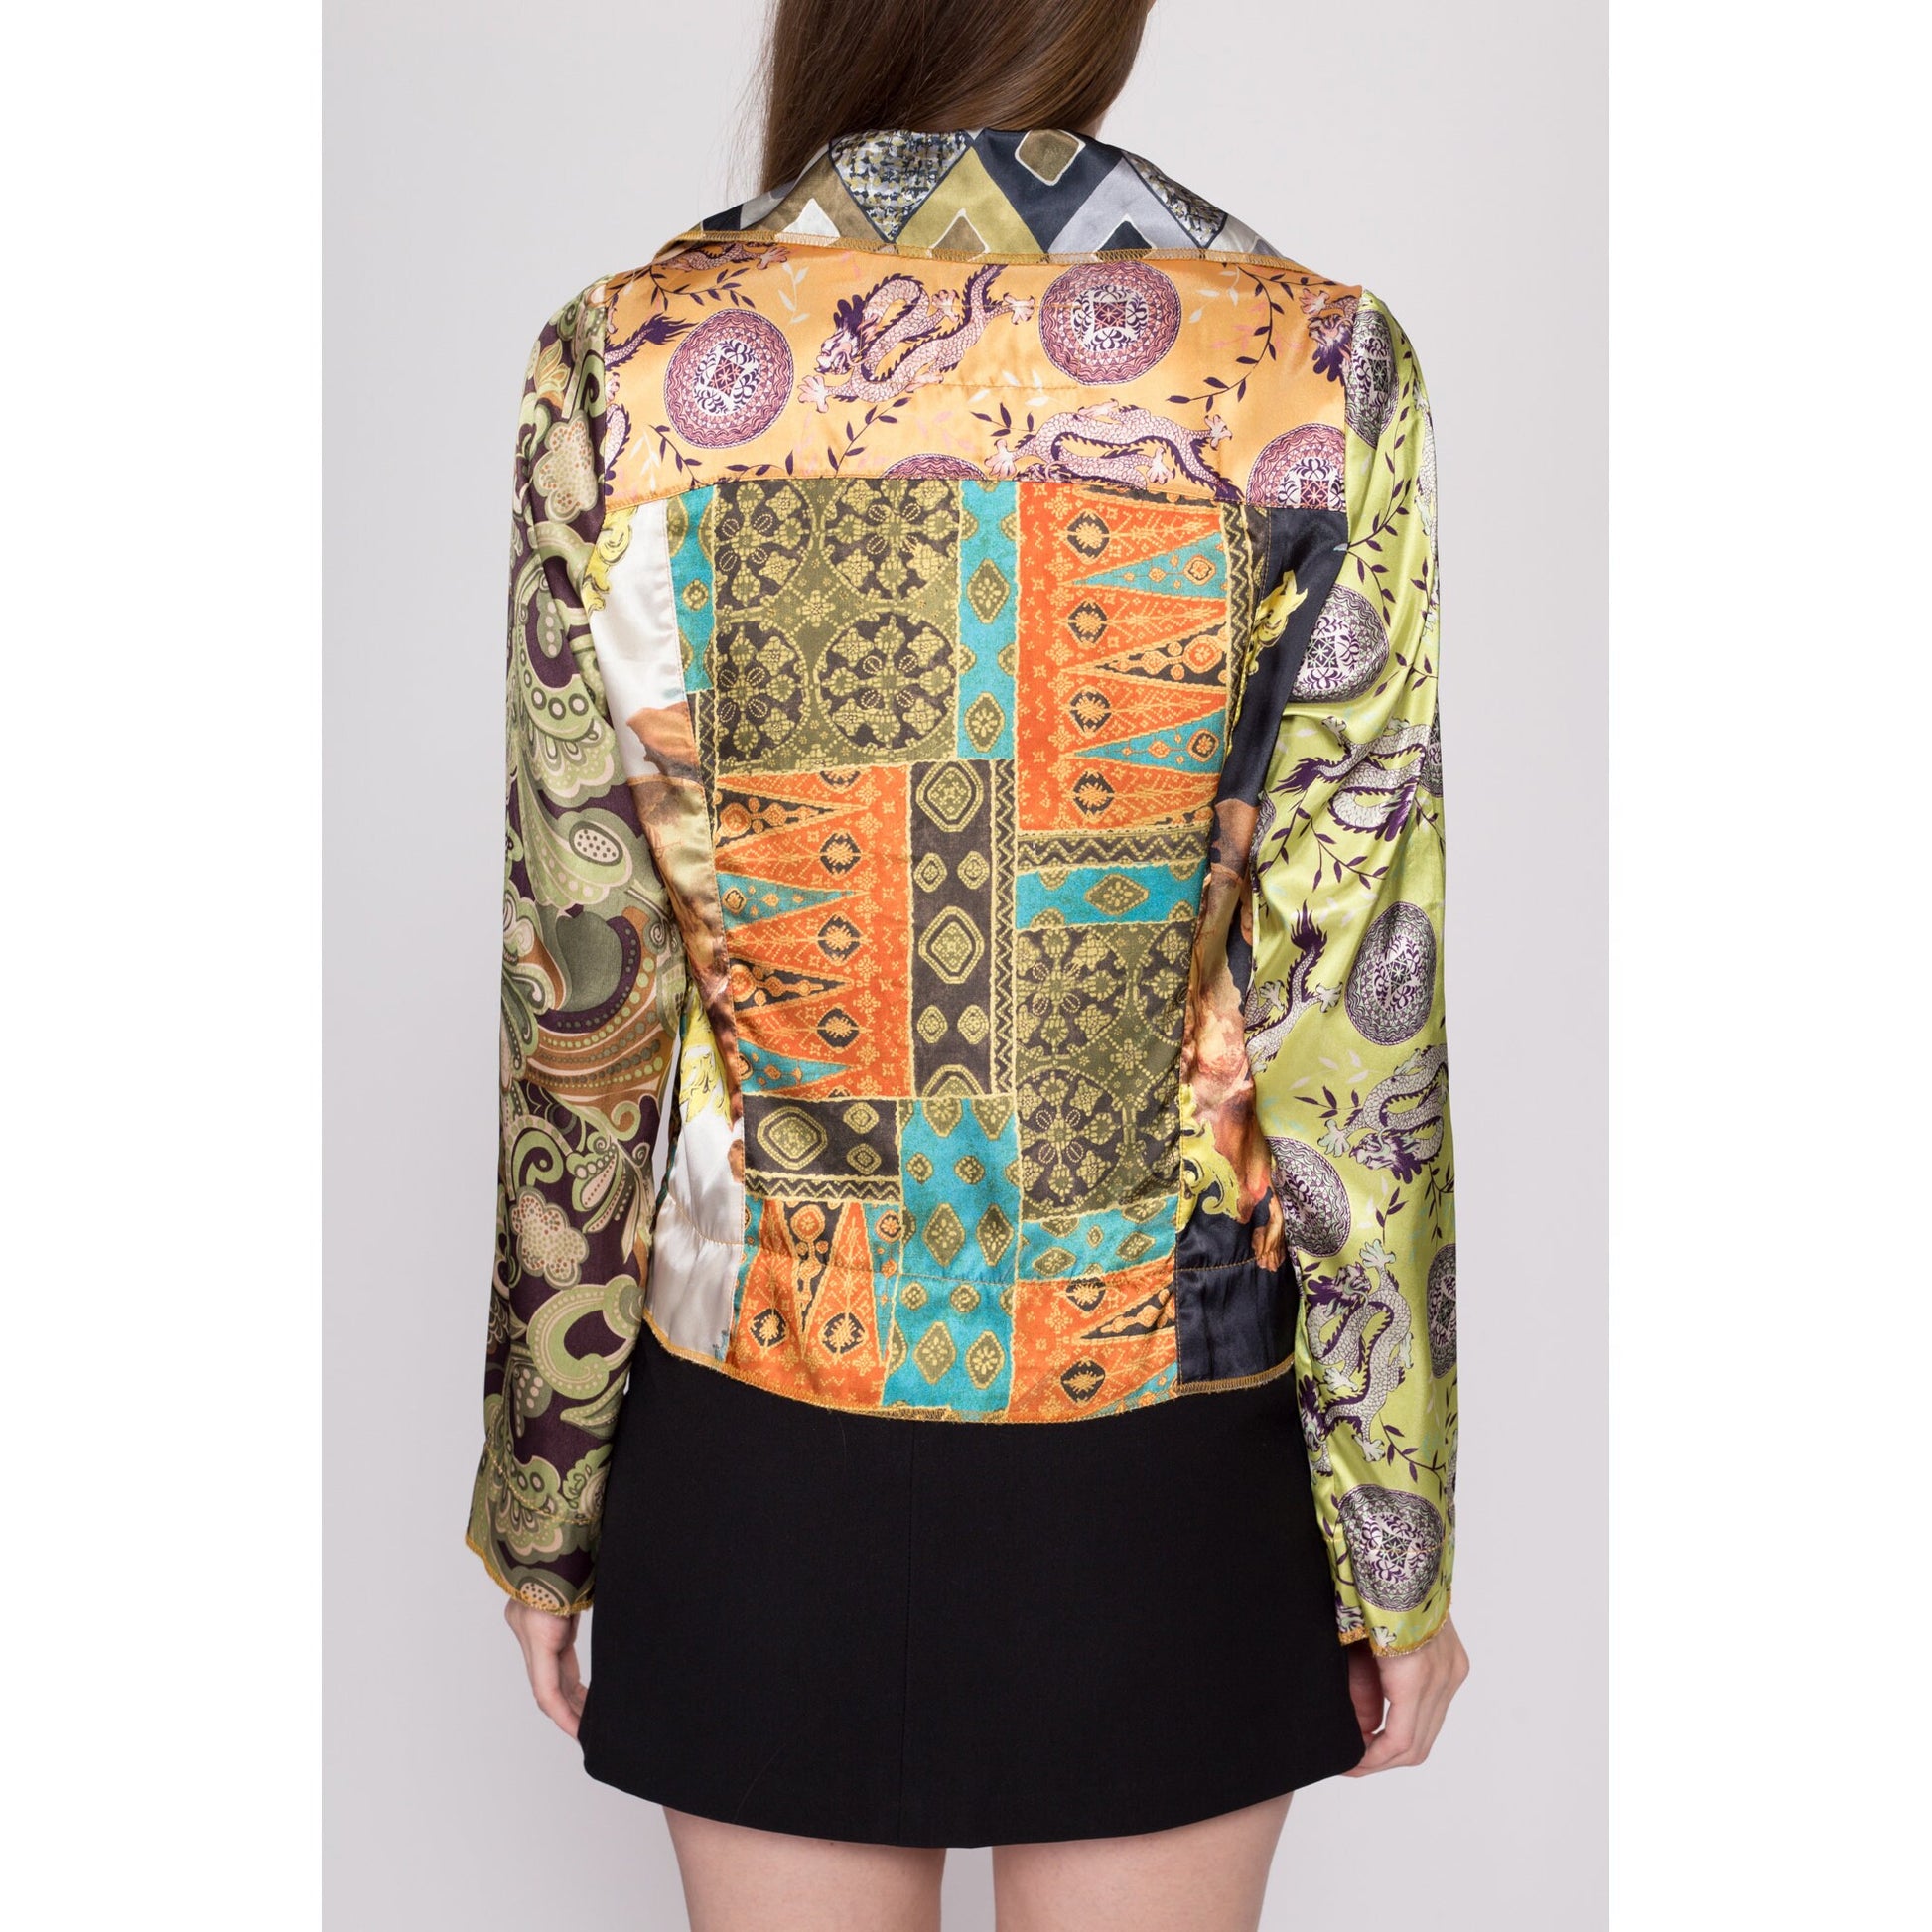 Medium 90s Baroque Patchwork Satin Cropped Jacket | Boho Collared Abalone Button Up Top